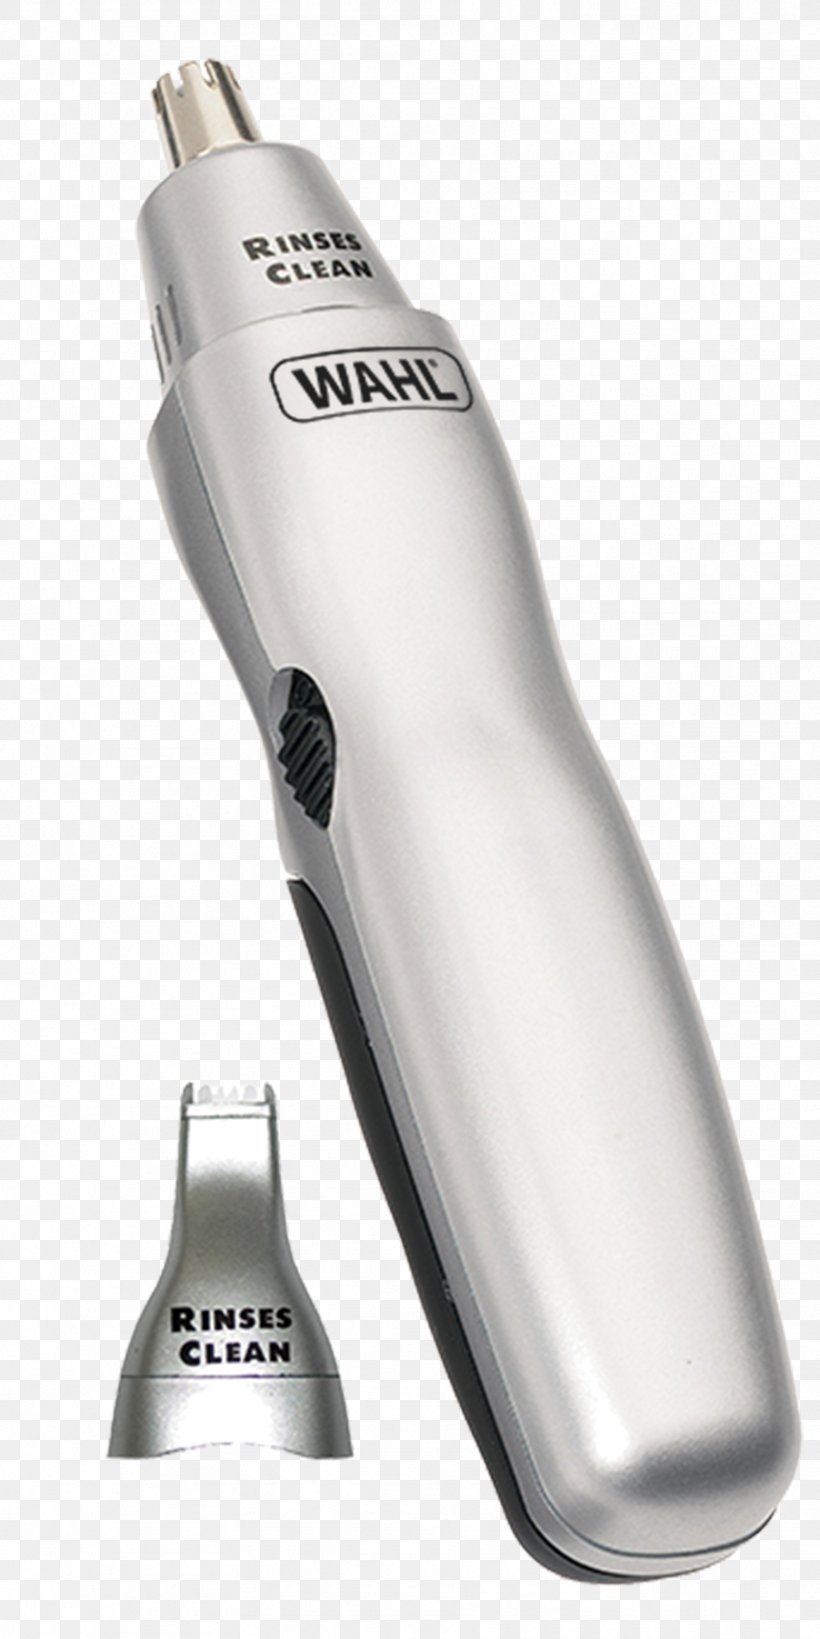 Hair Clipper Wahl Clipper Electric Razors & Hair Trimmers Wahl 3 In 1 Trimmer 5545-400 Wahl GroomsMan Pro, PNG, 1772x3543px, Hair Clipper, Beard, Electric Razors Hair Trimmers, Eyebrow, Hair Download Free